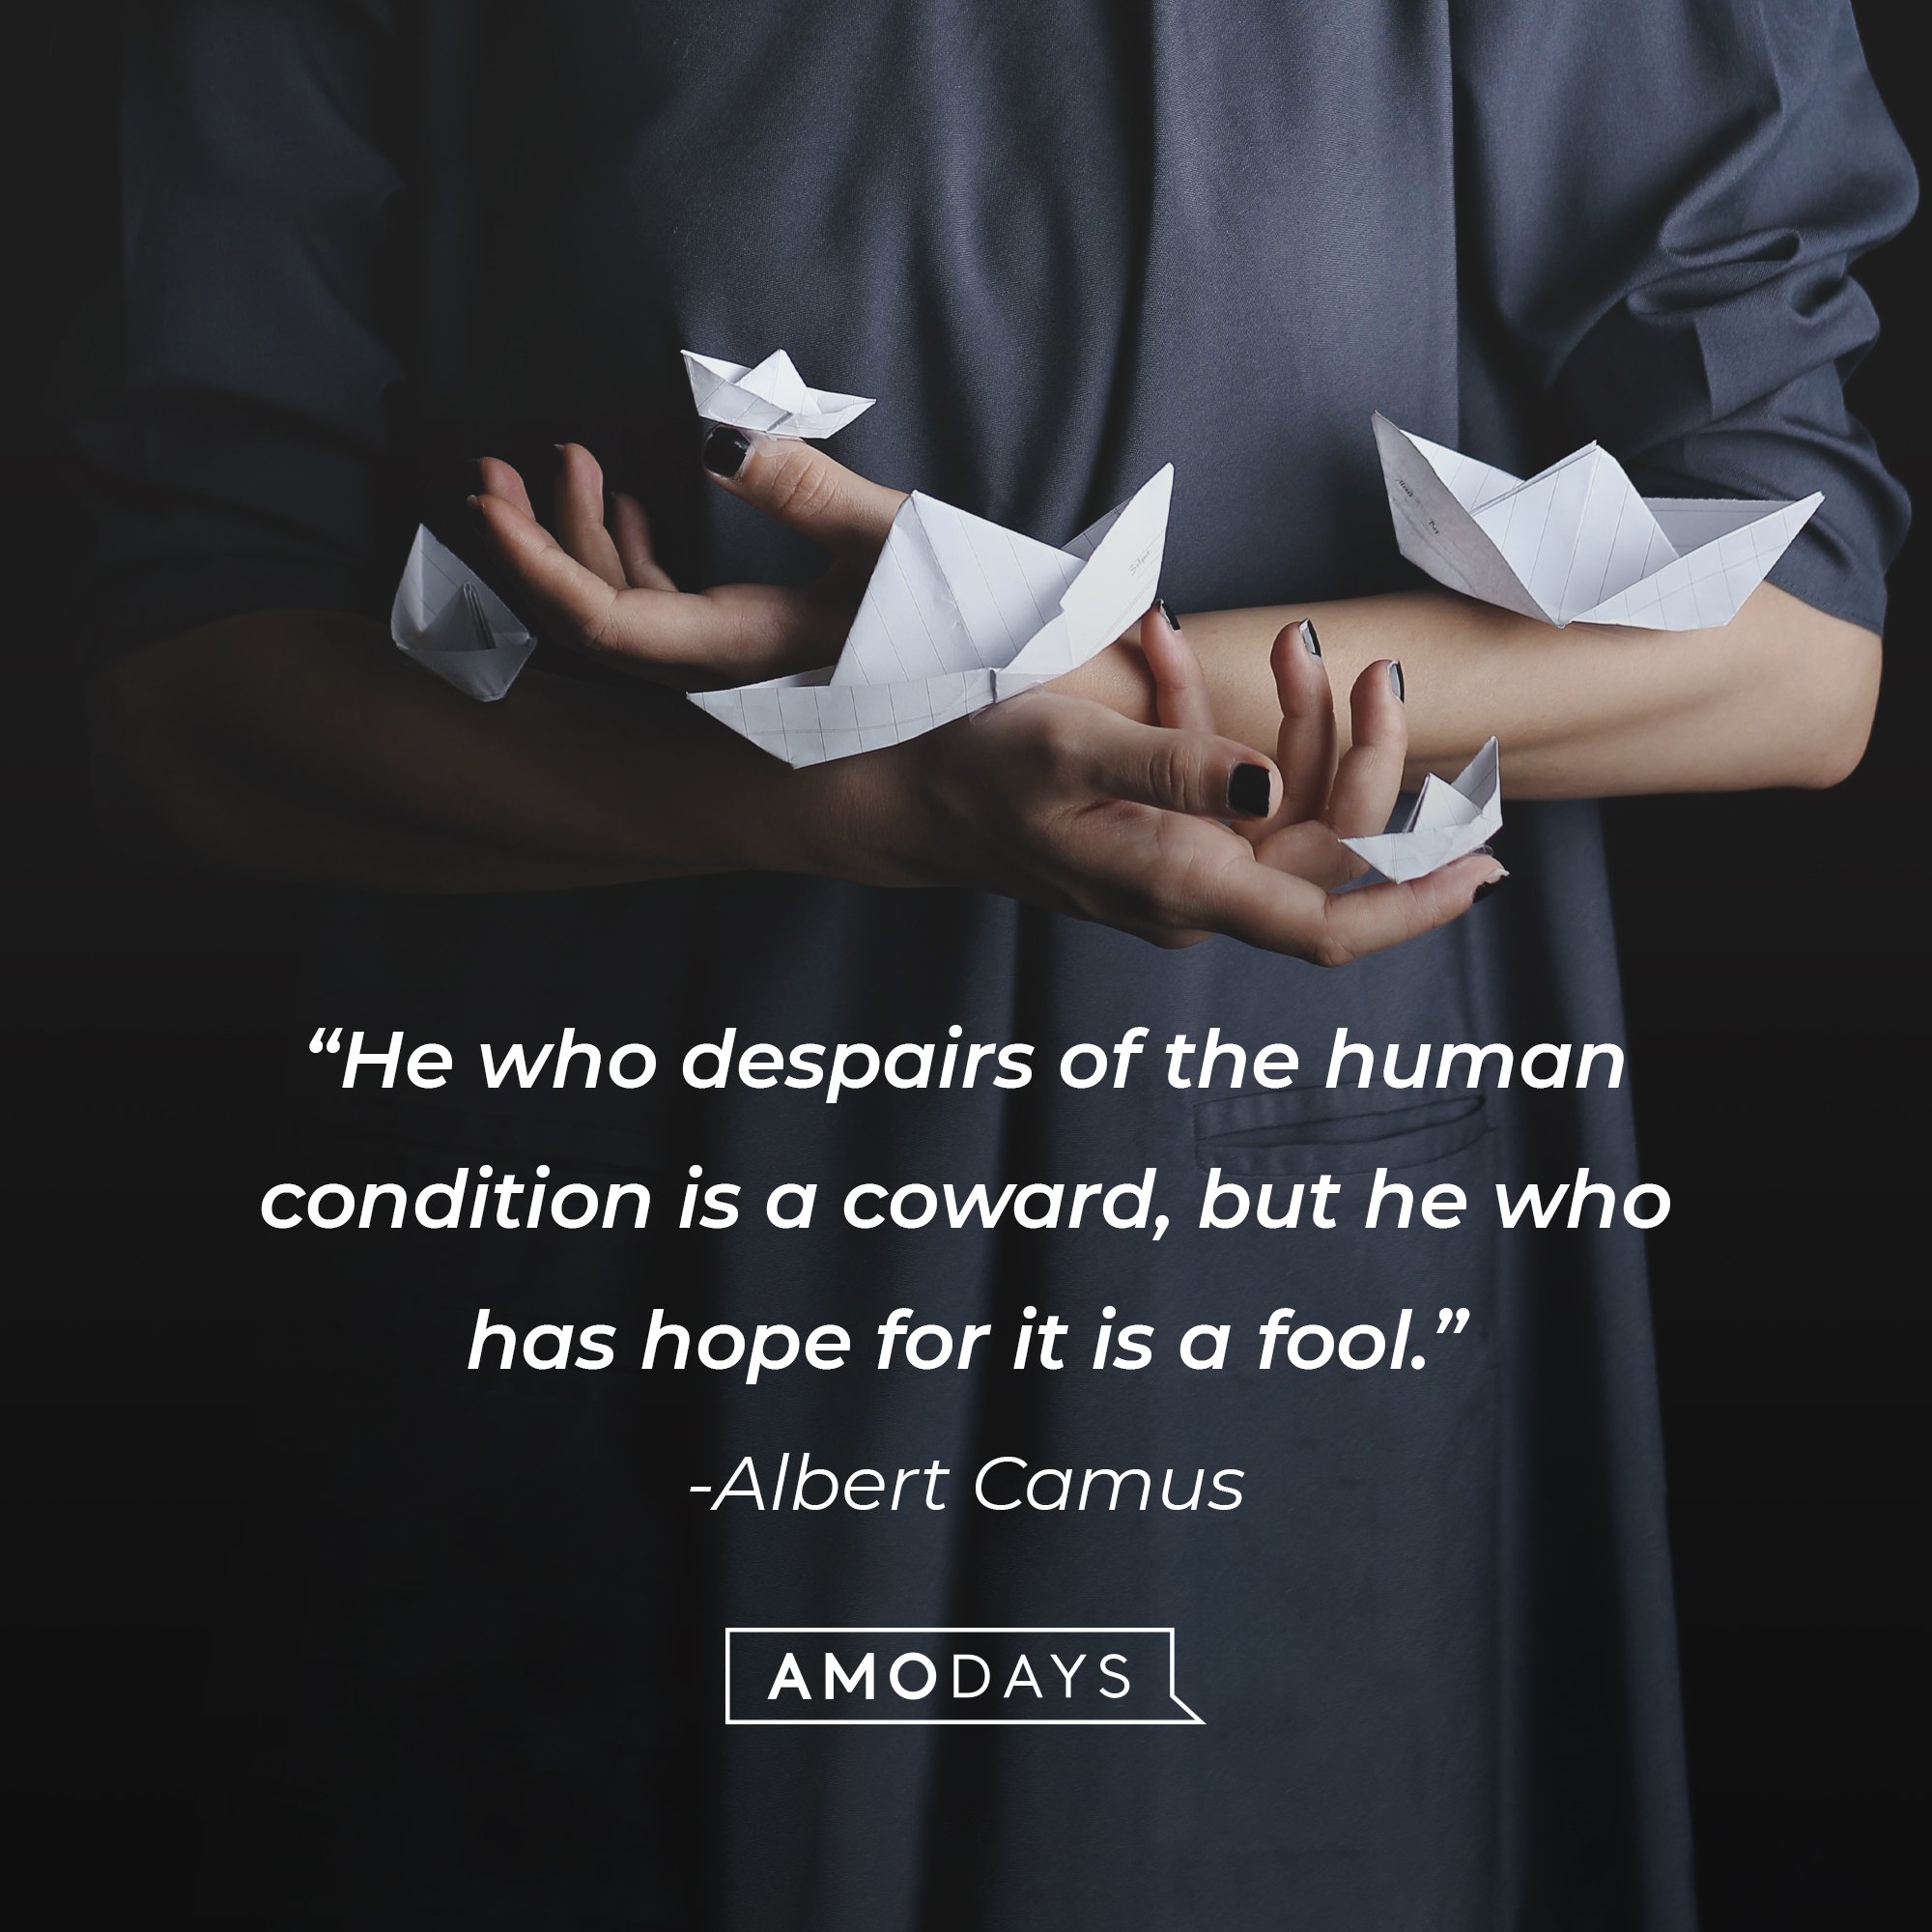 Albert Camus' quote: "He who despairs of the human condition is a coward, but he who has hope for it is a fool."  | Image: AmoDays